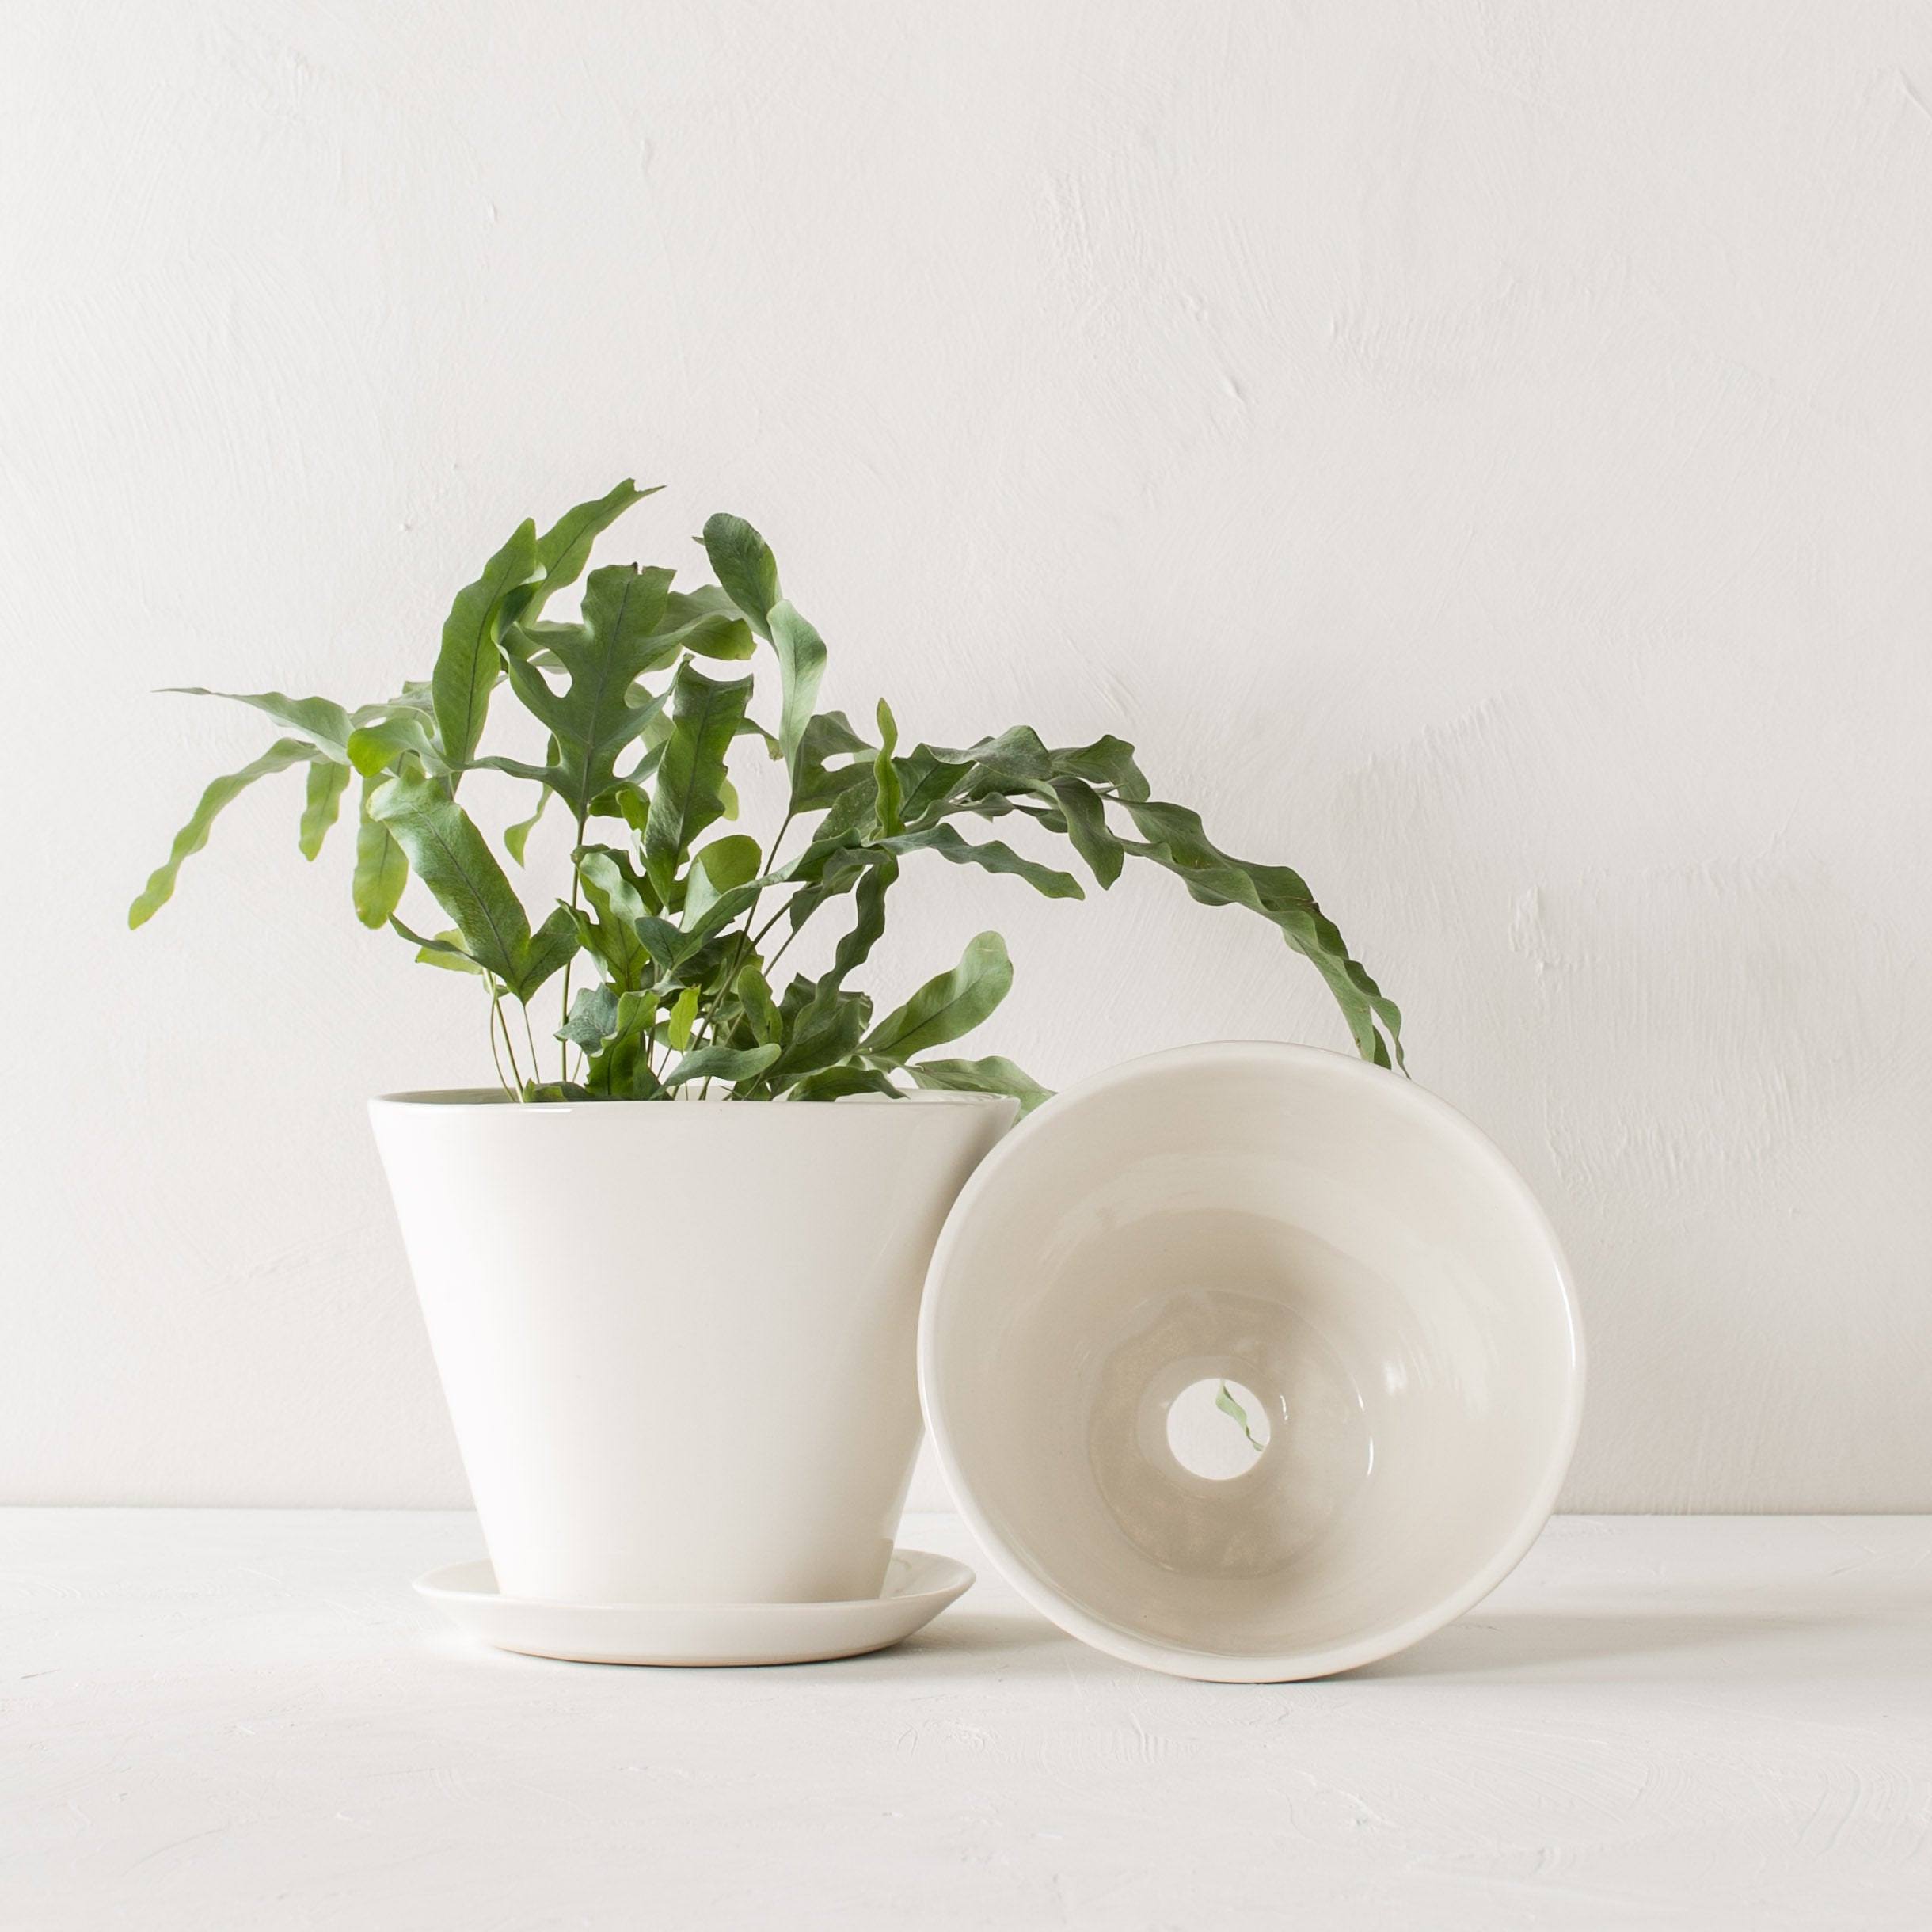 Two minimal white 7 inch tapered planters one with plant inside, one on its side showing the bottom drainage hole. Upright planter has a bottom drainage dish. Designed by Convivial Production, sold by Shop Verdant Kansas City plant store.